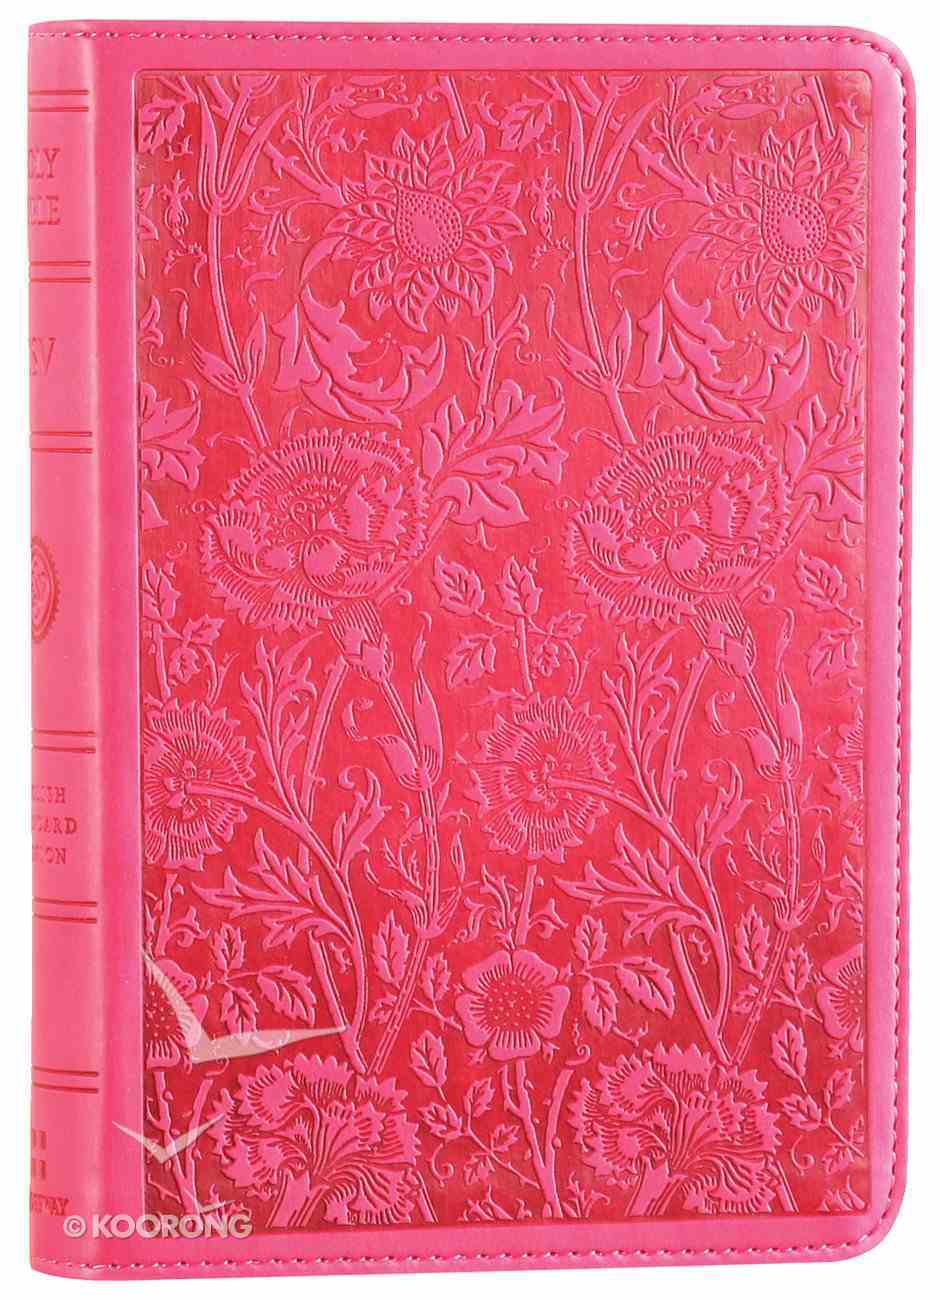 esv-large-print-compact-bible-berry-floral-design-red-letter-edition-koorong